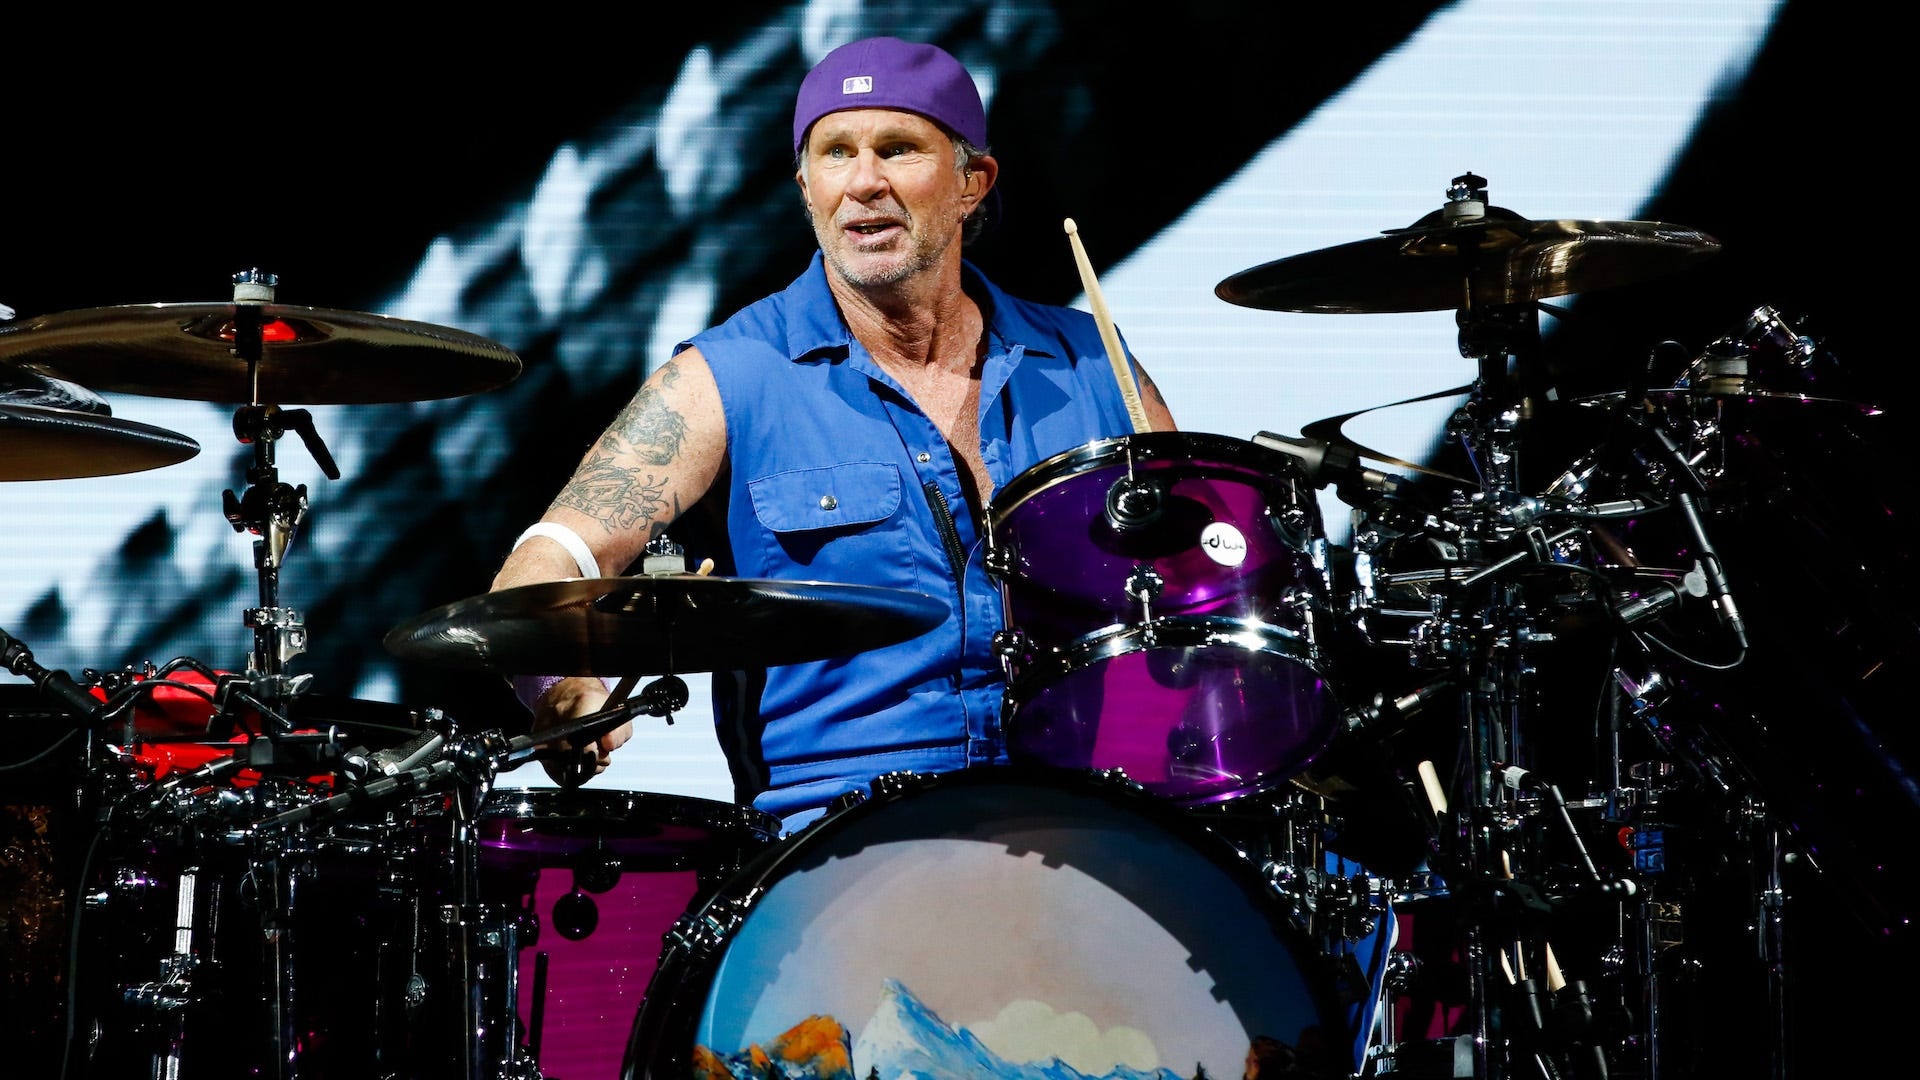 Chad Smith, Red Hot Chili Peppers, Daughter on American Idol, 1920x1080 Full HD Desktop